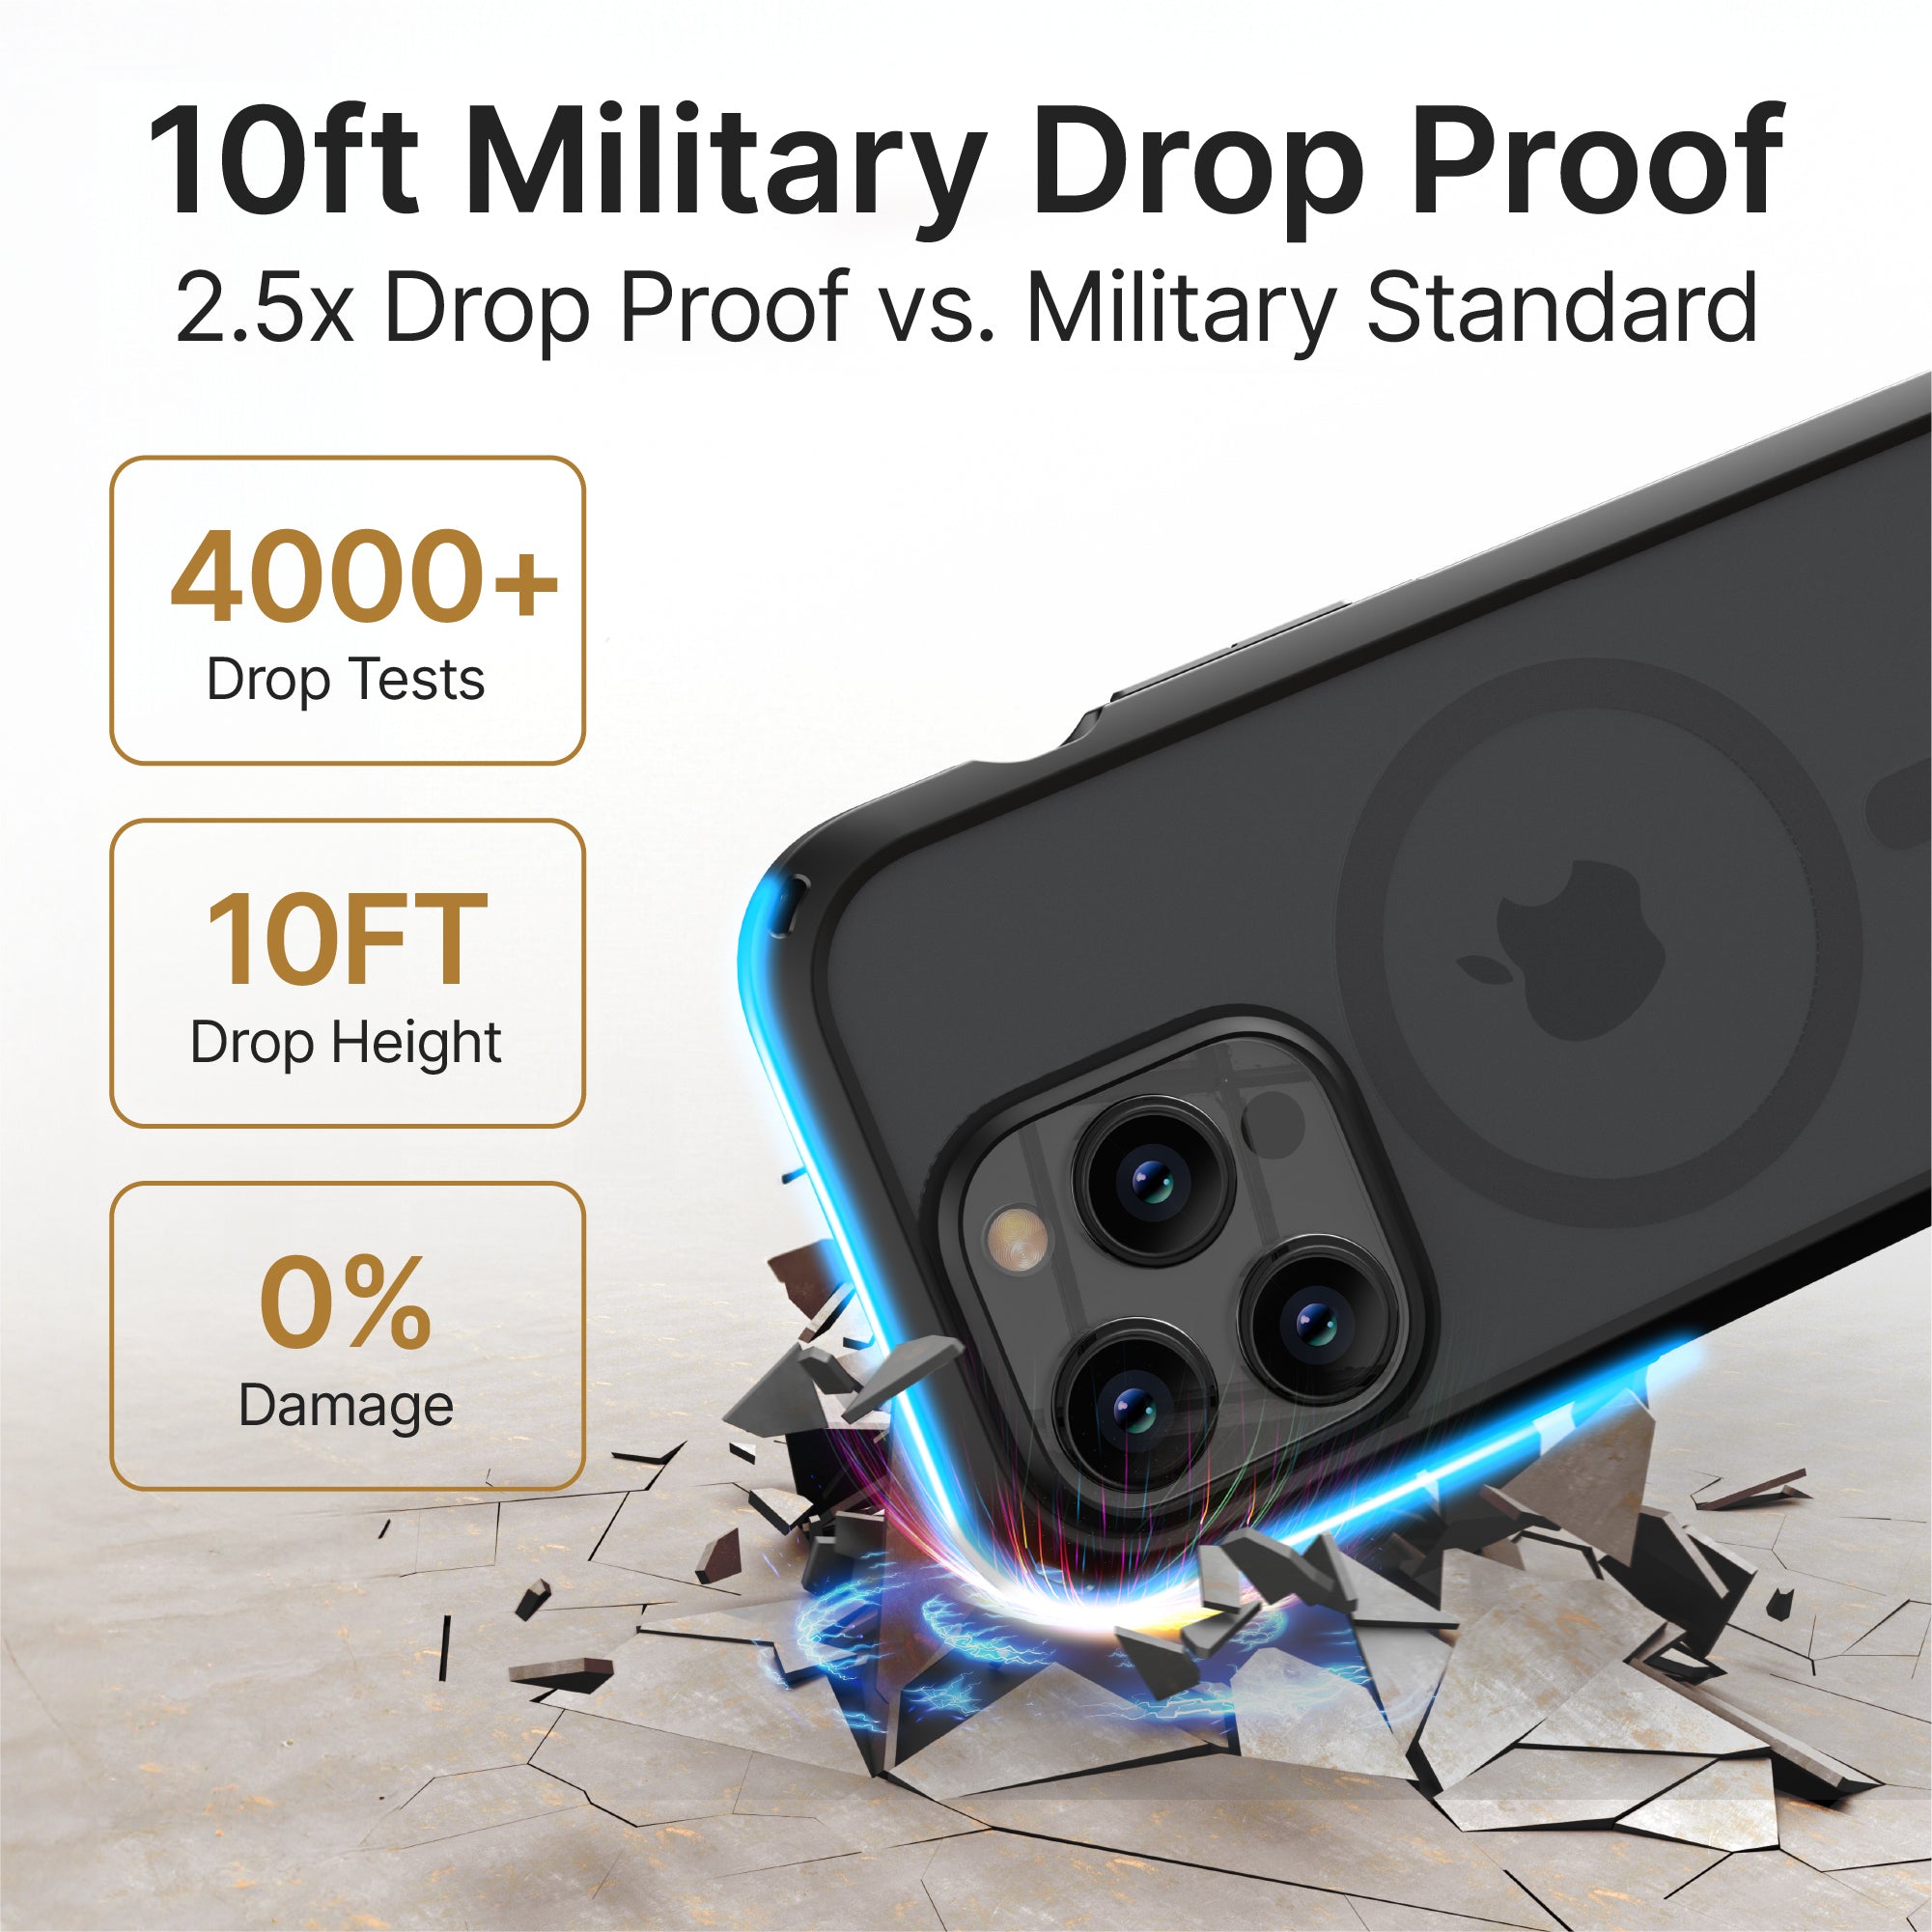 catalyst iphone 15 series influence case magsafe compatible stealth black for iphone 15 pro with cracked floor text reads 10ft military drop proof 2.5x drop proof vs military standard 4000+ drop tests 10ft drop height 0% damage